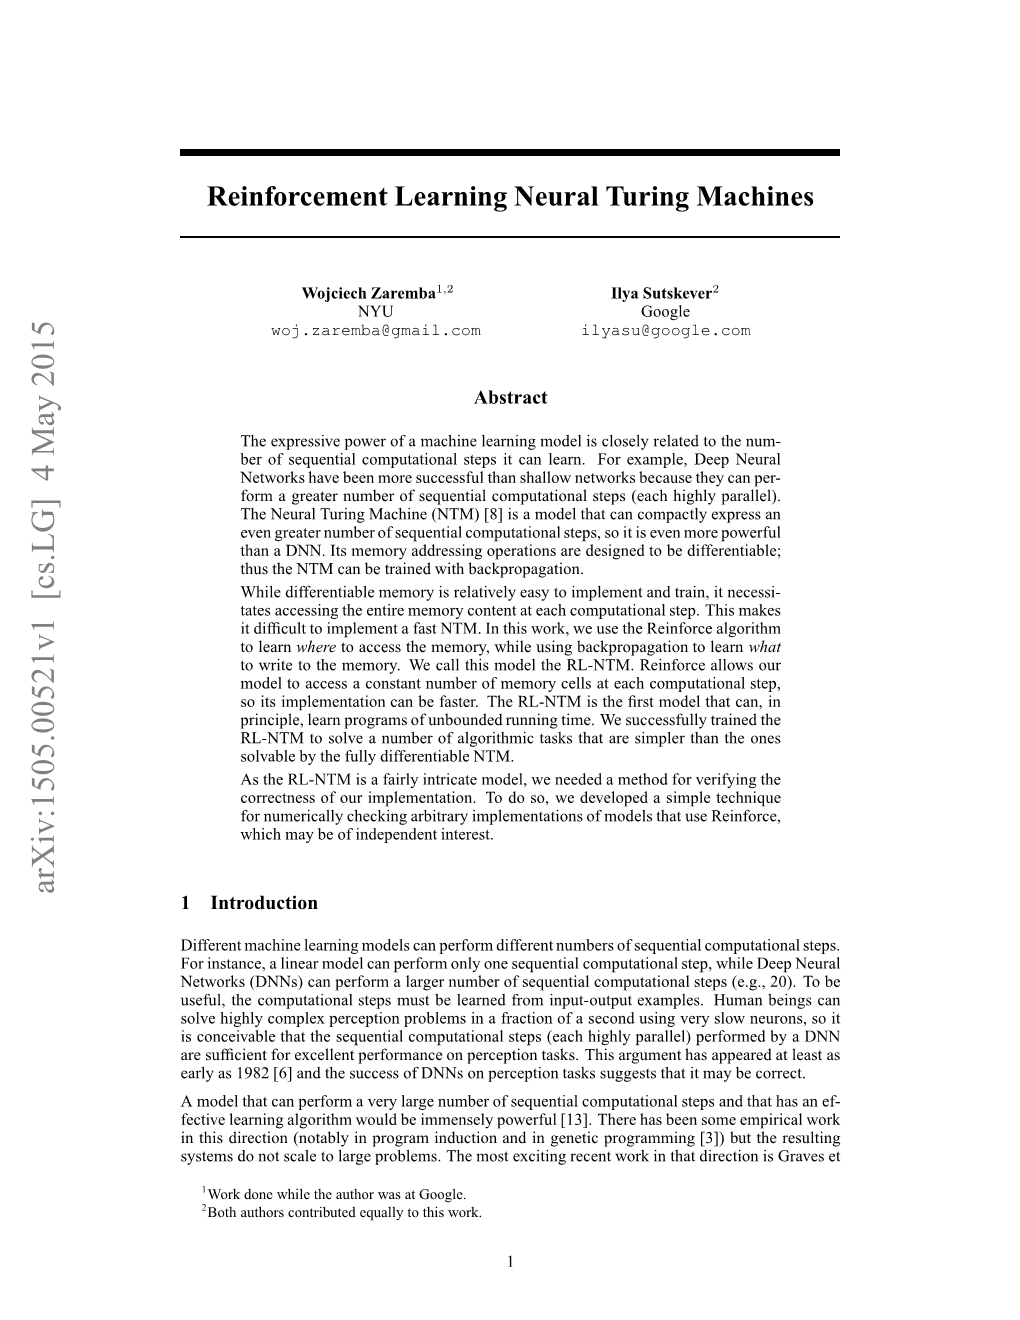 Reinforcement Learning Neural Turing Machines